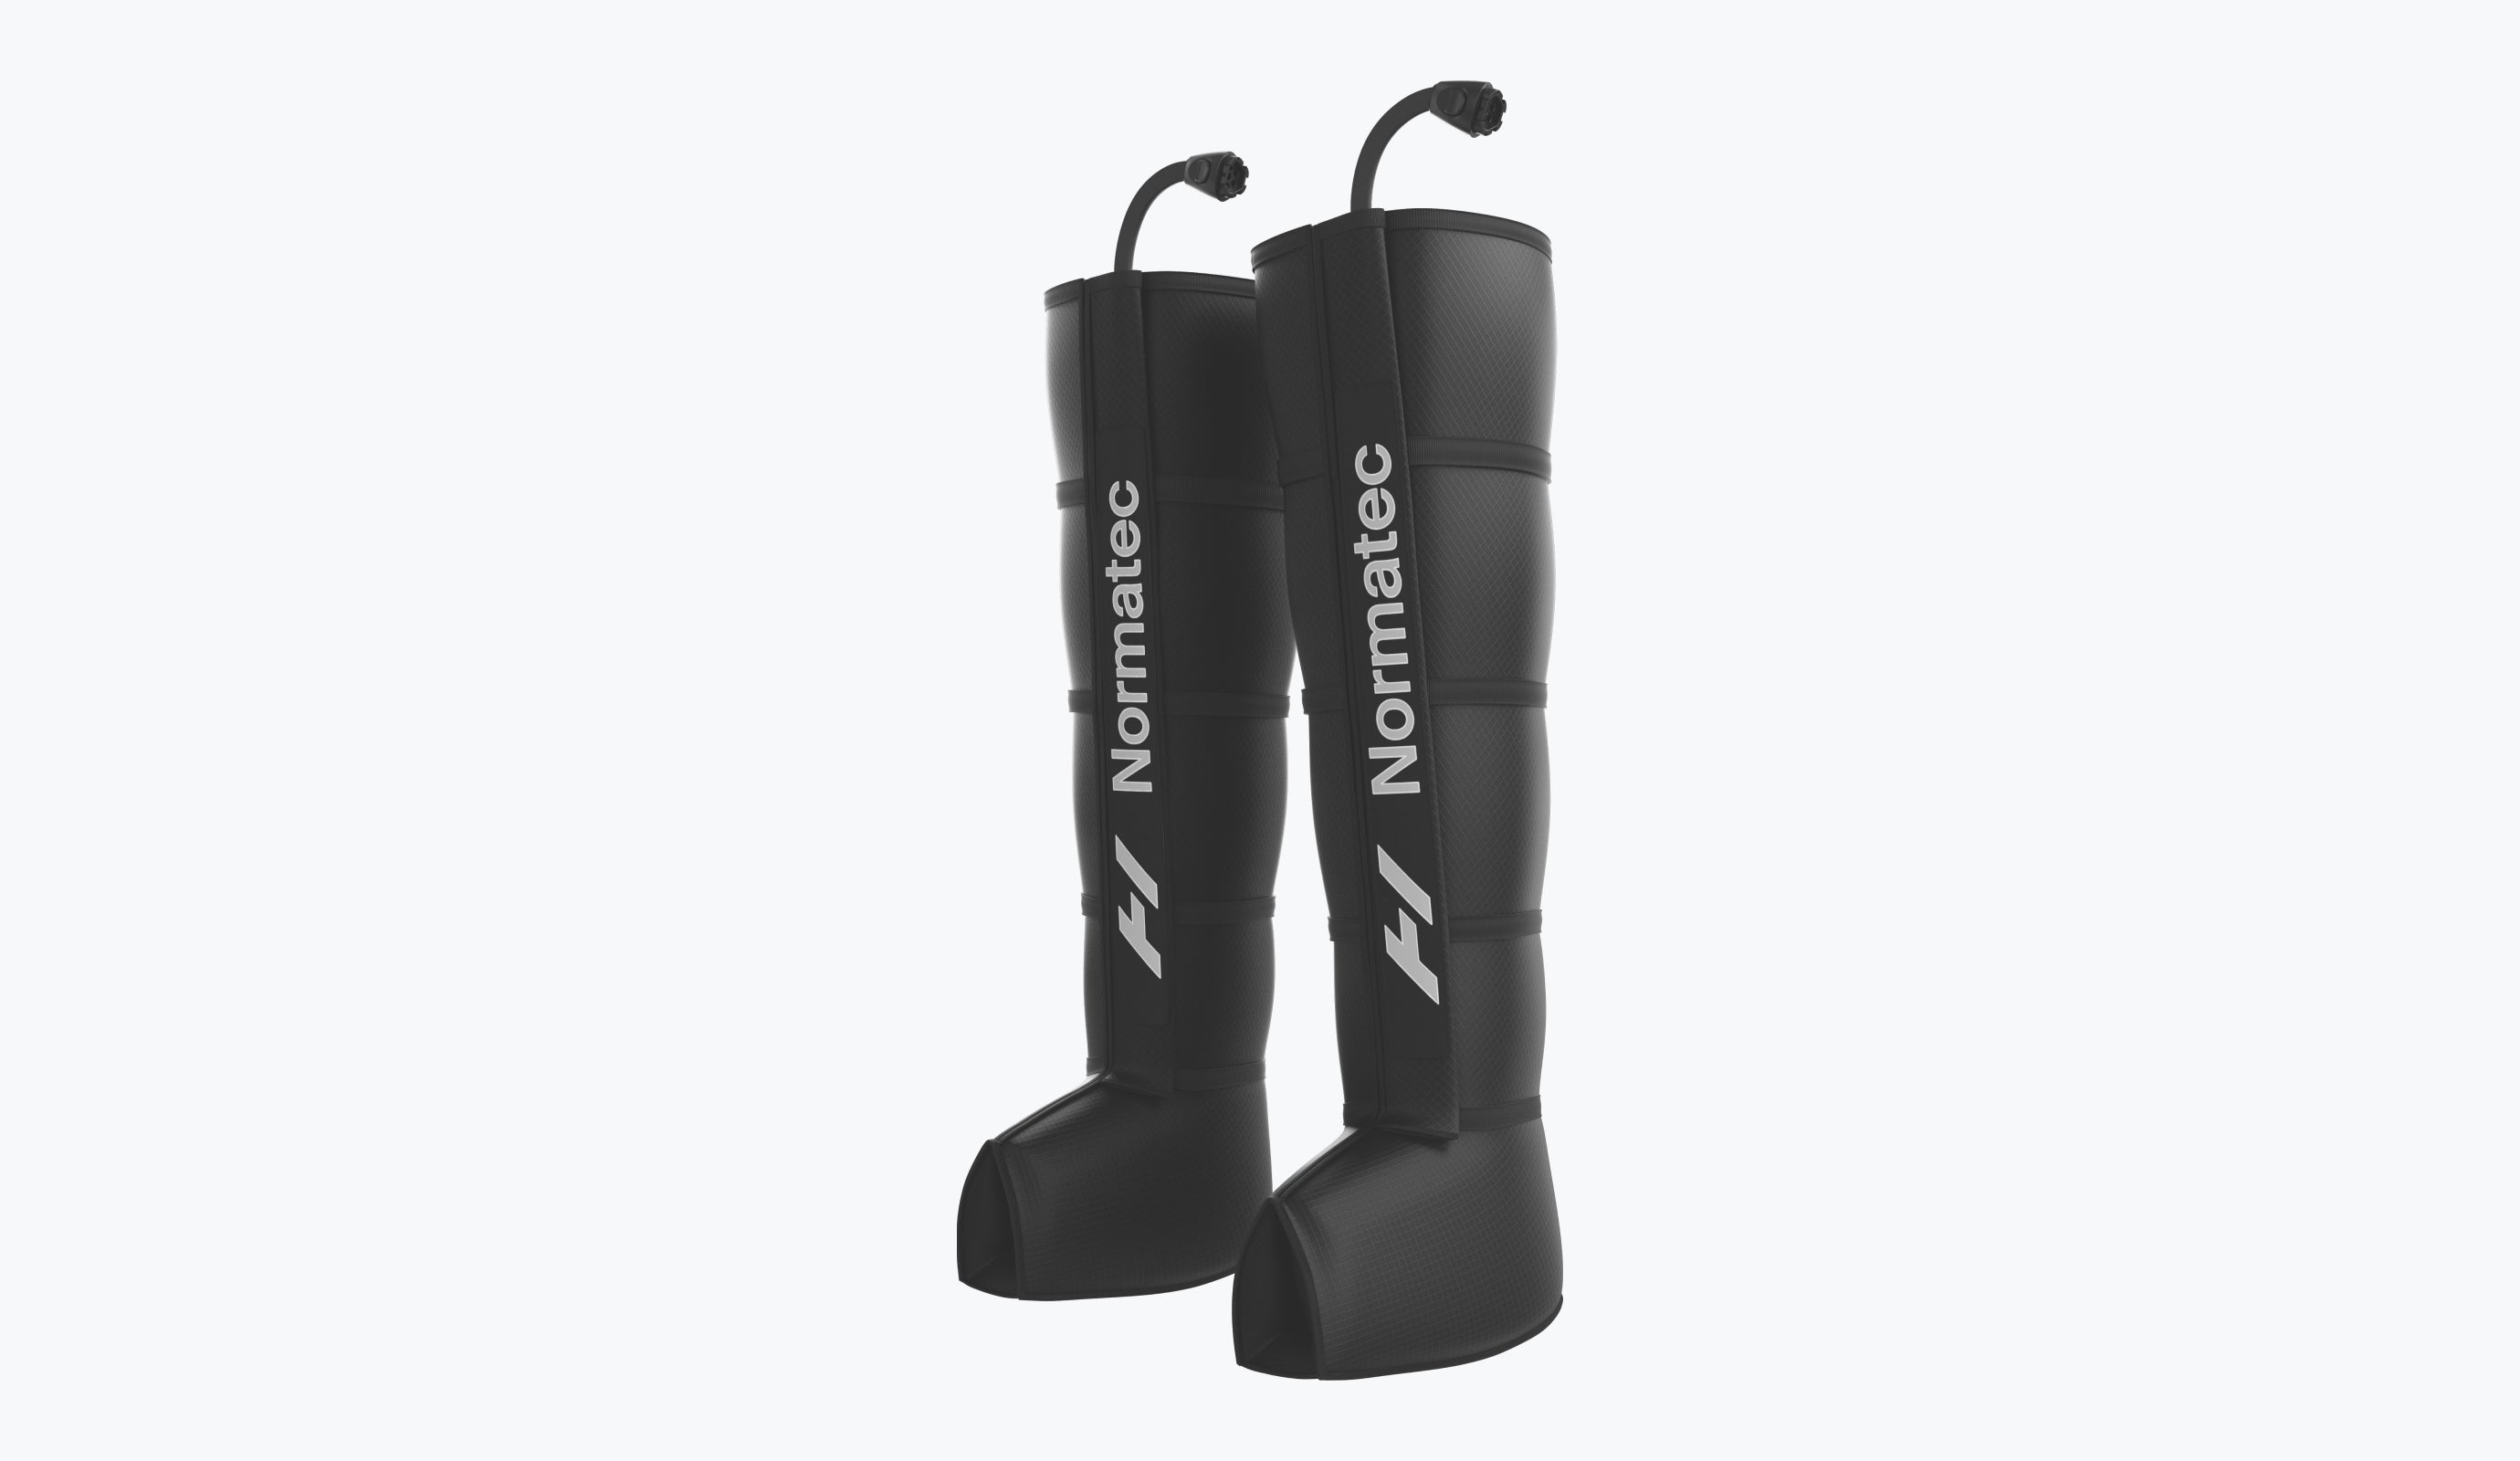 image of Normatec 2.0 that links to the corresponding shop page